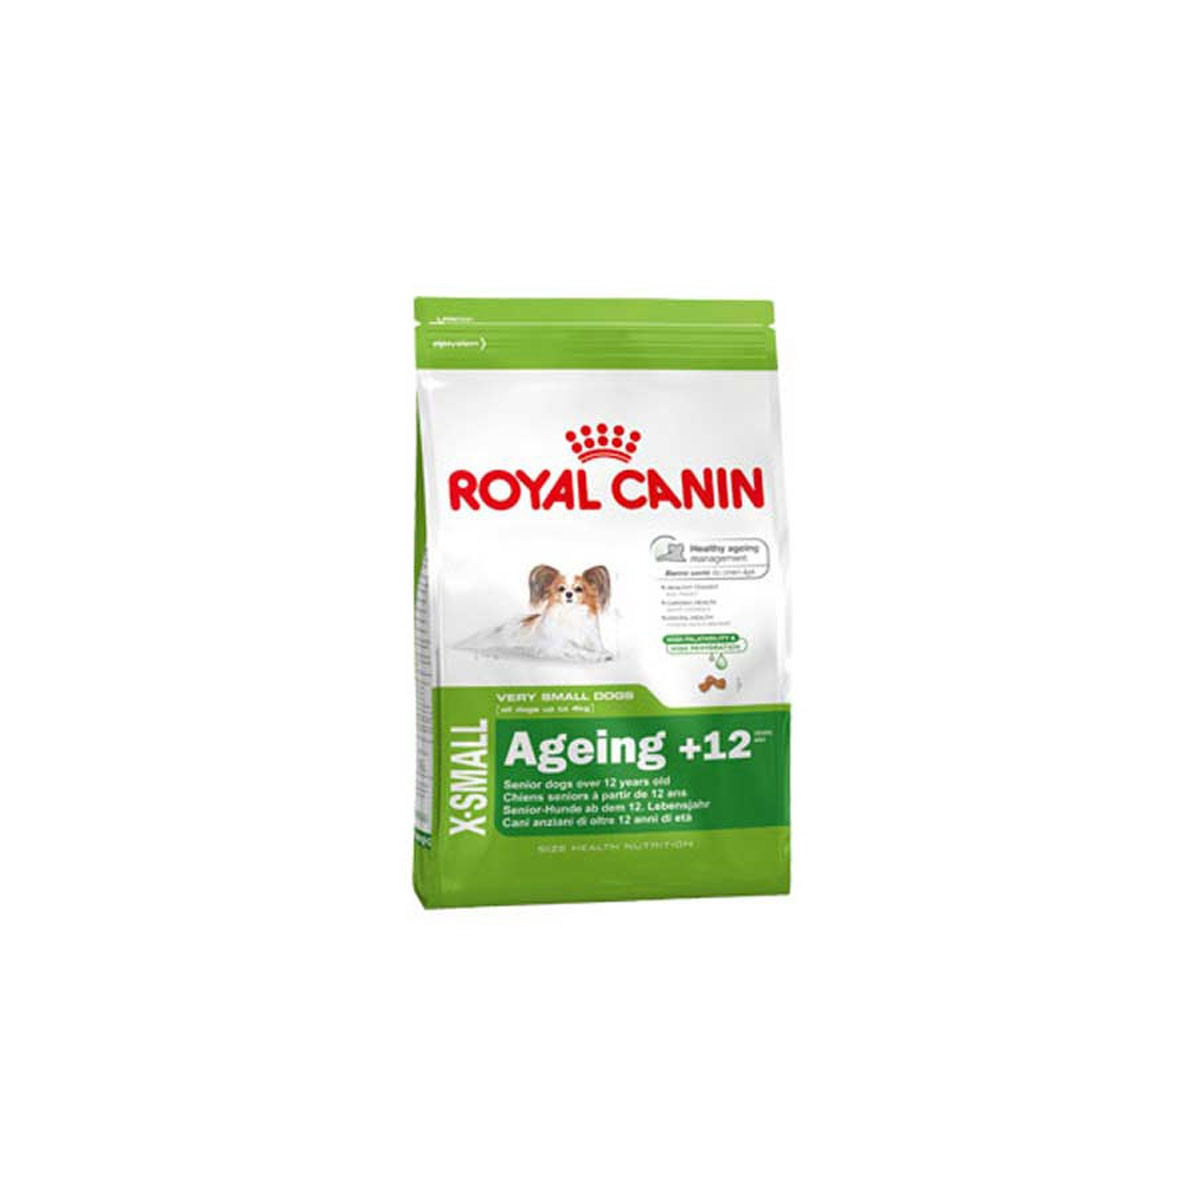 Royal Canin X-small Ageing +12